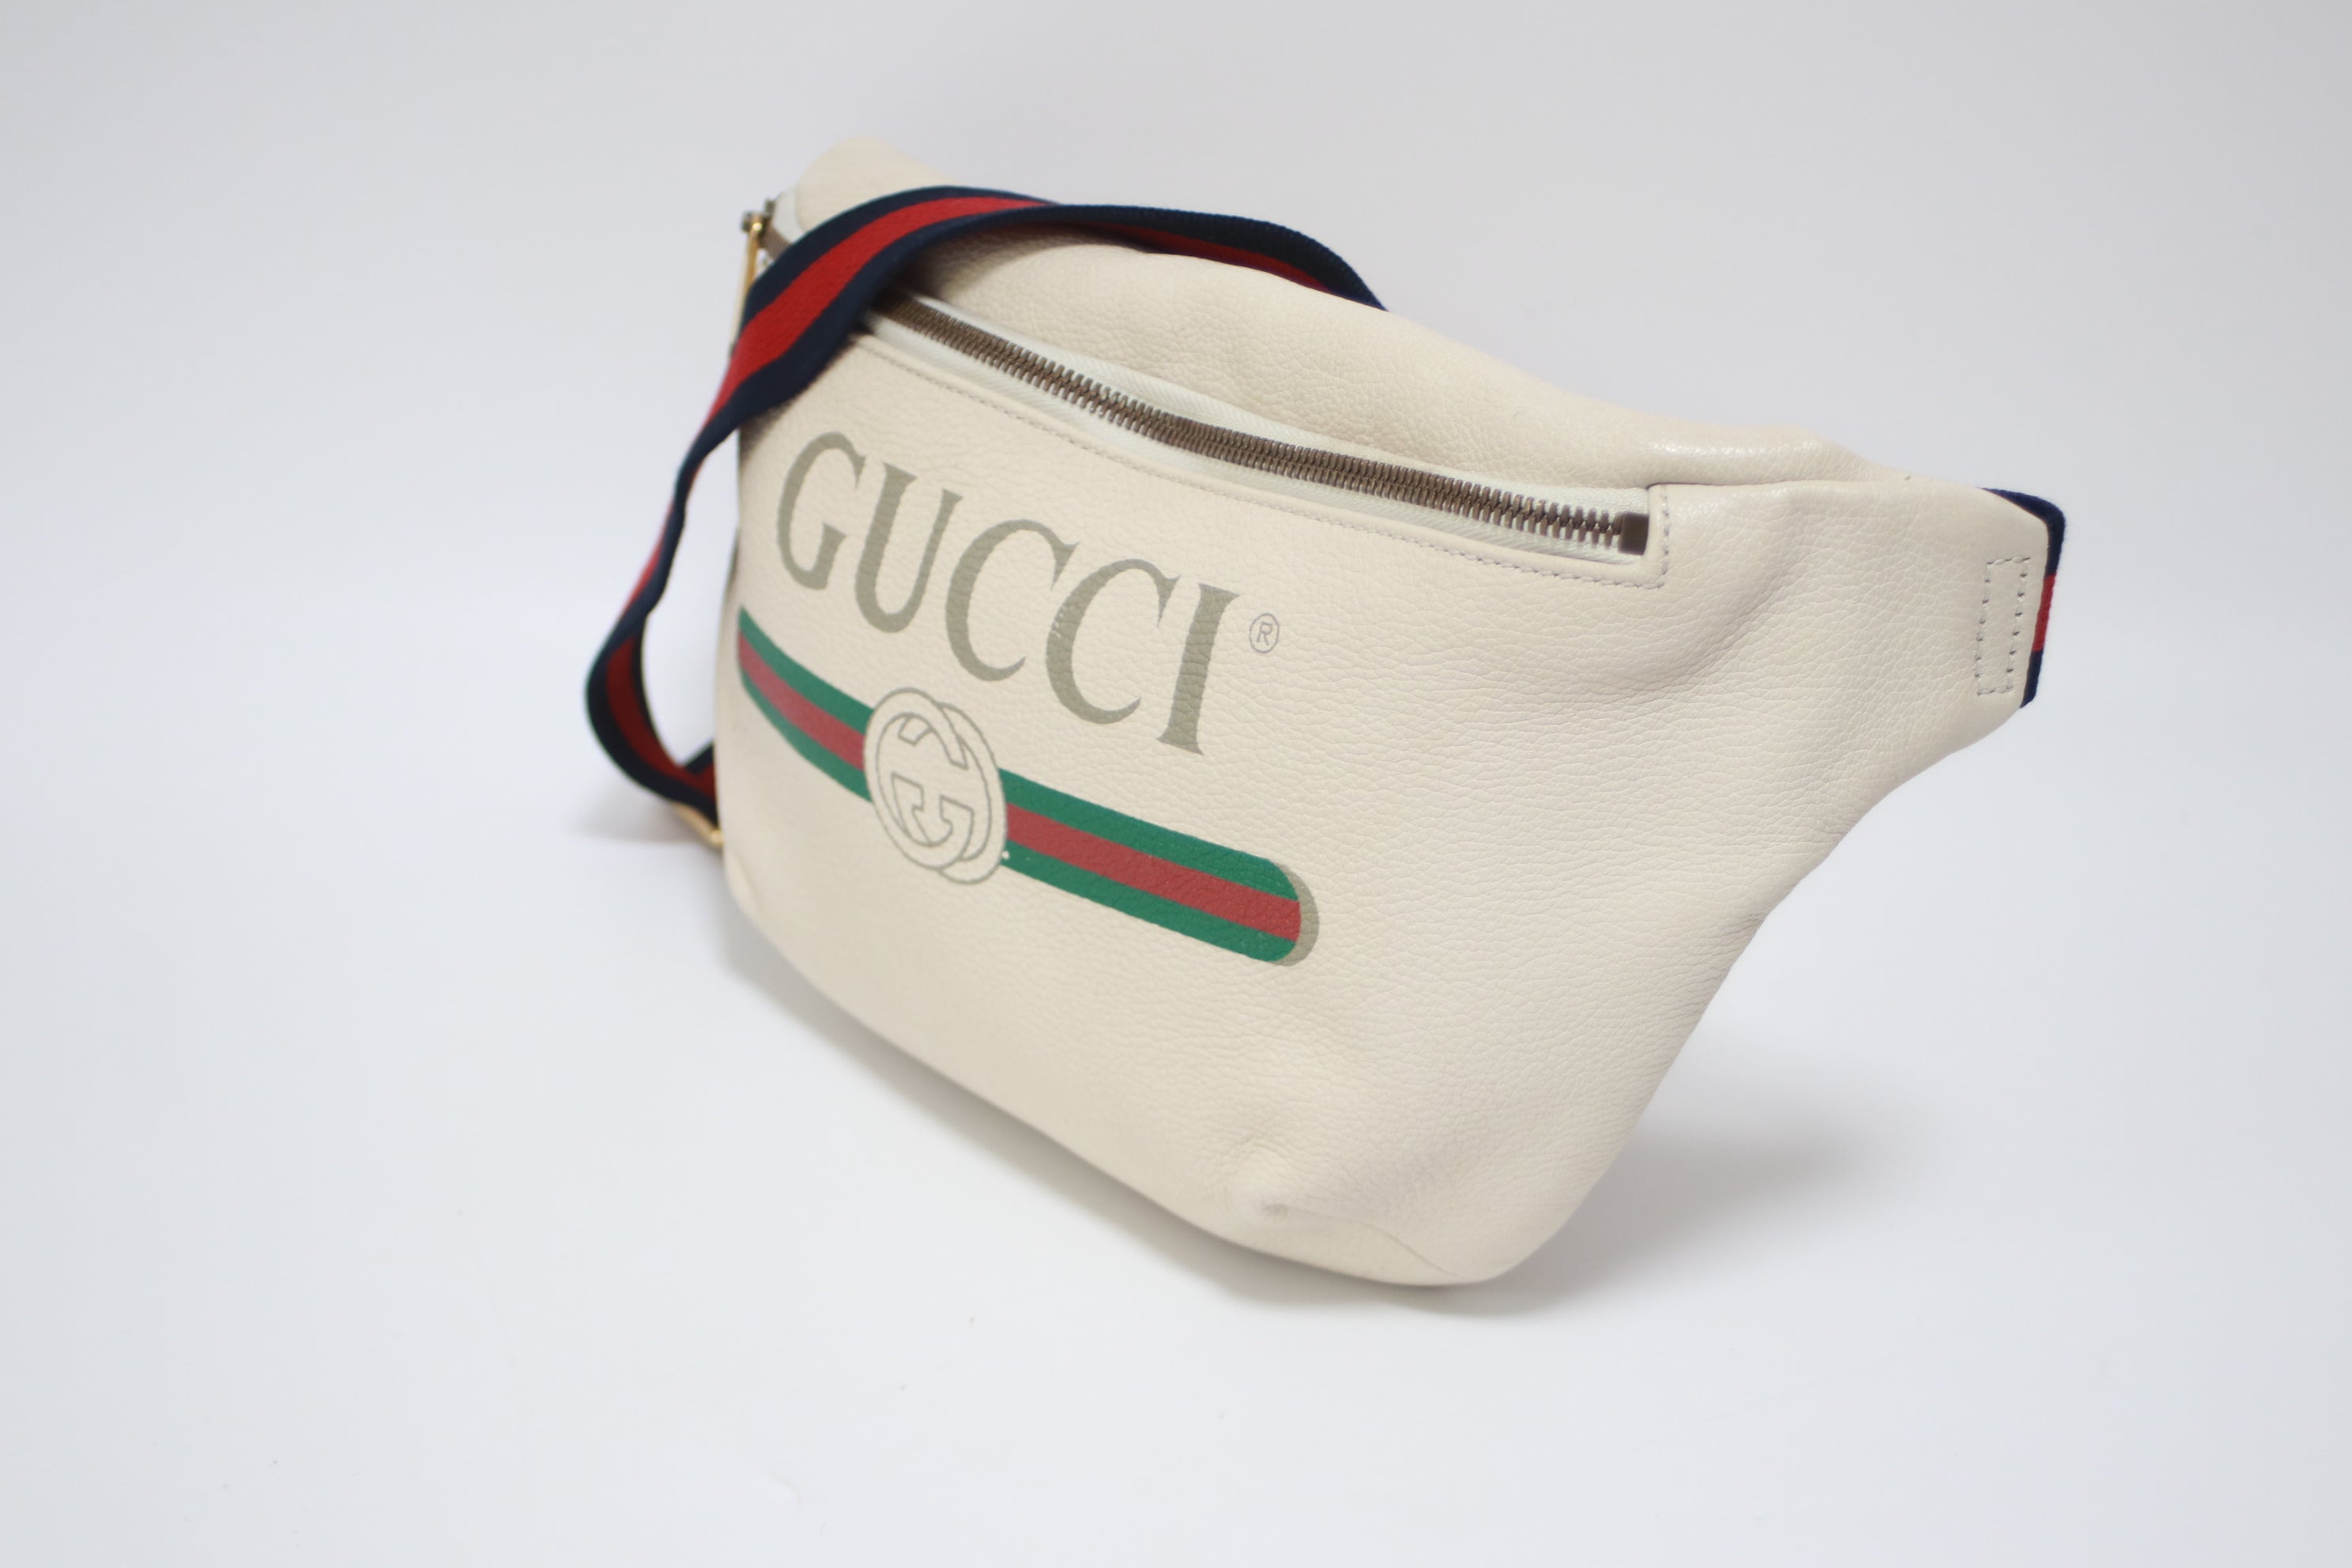 Gucci Leather Beltbag Used (8079)